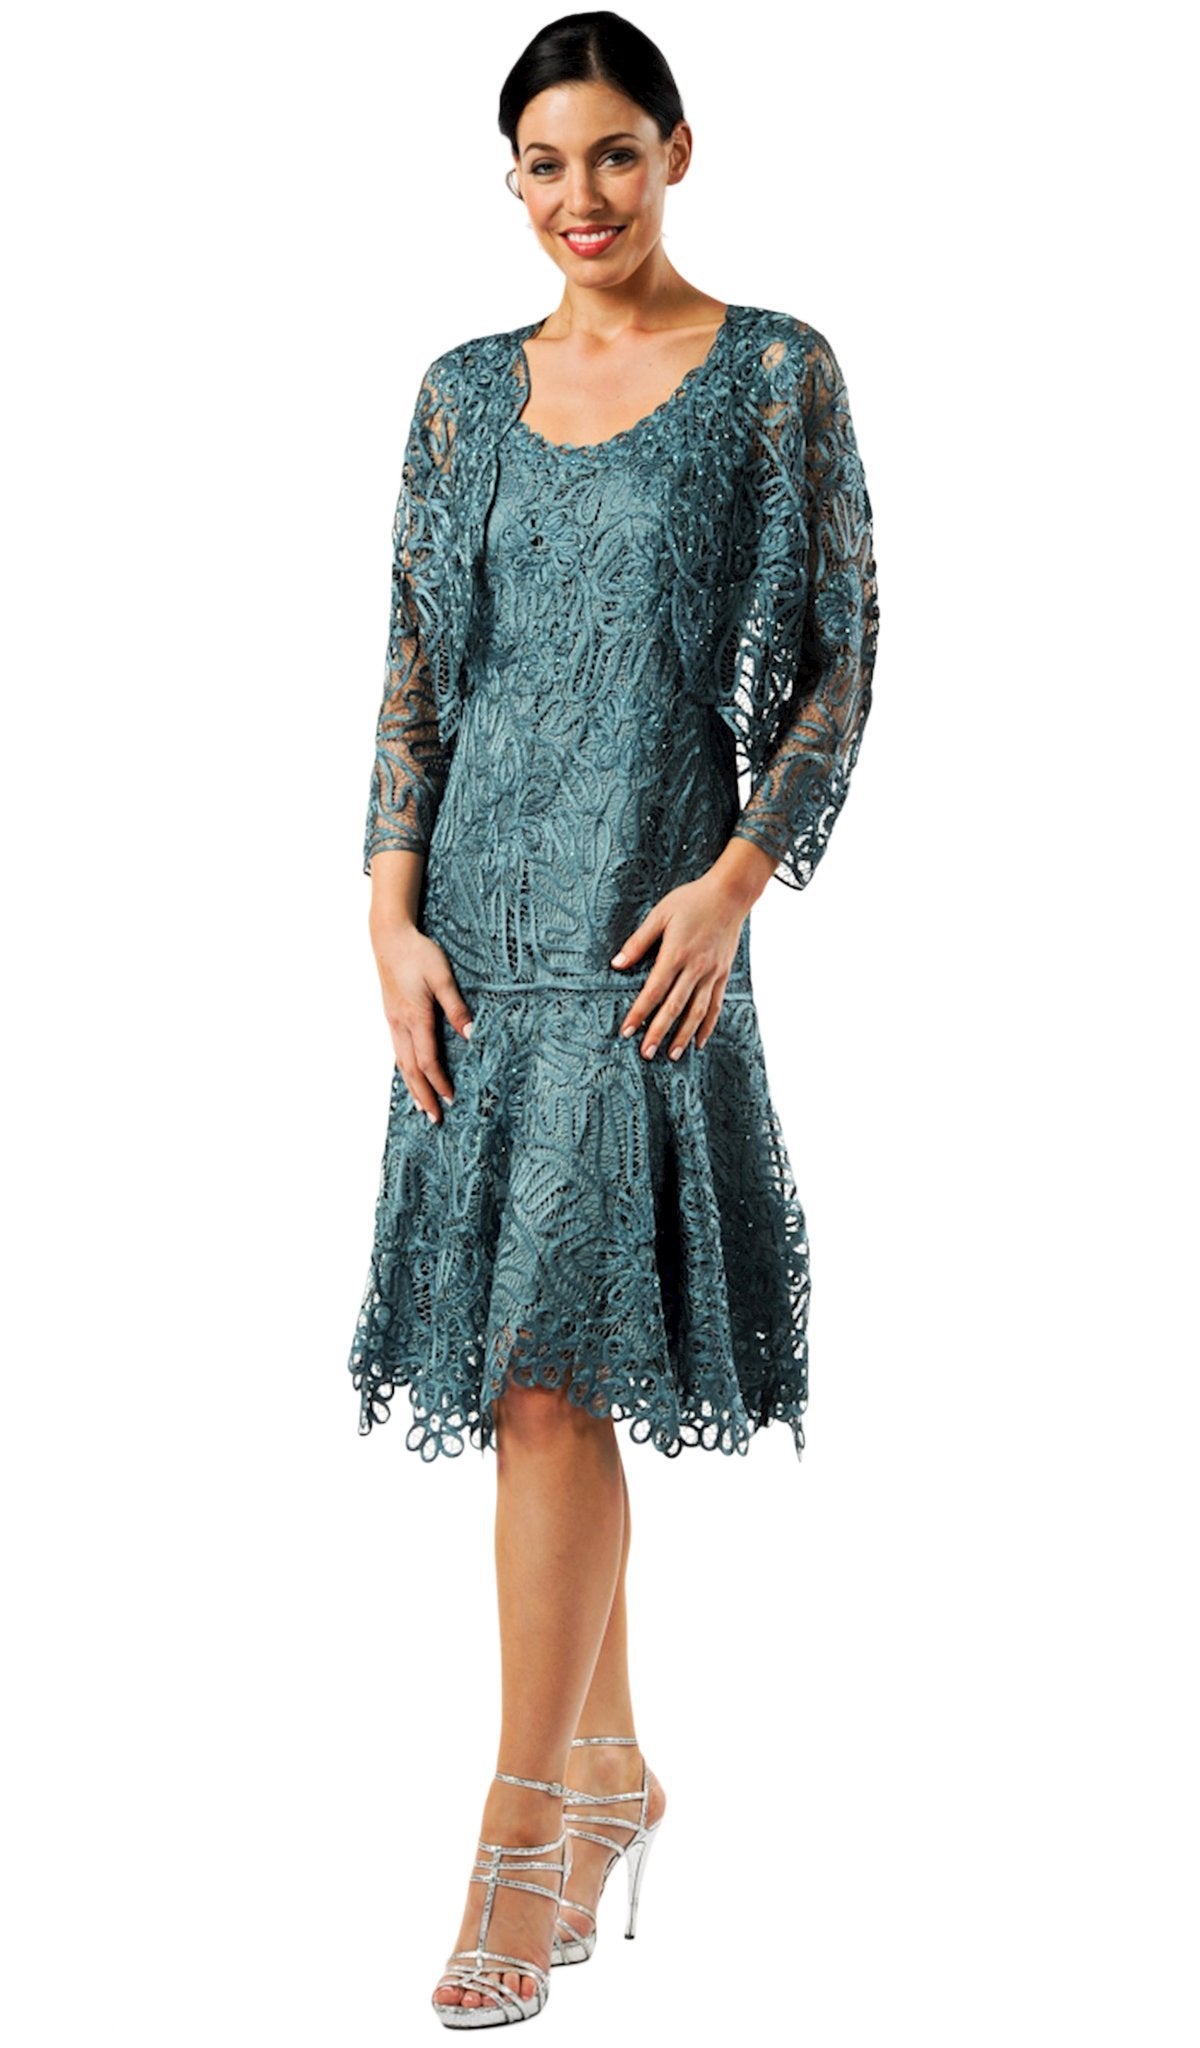 Soulmates - C9126SC Loose Blouse Beaded Embroidery Dress